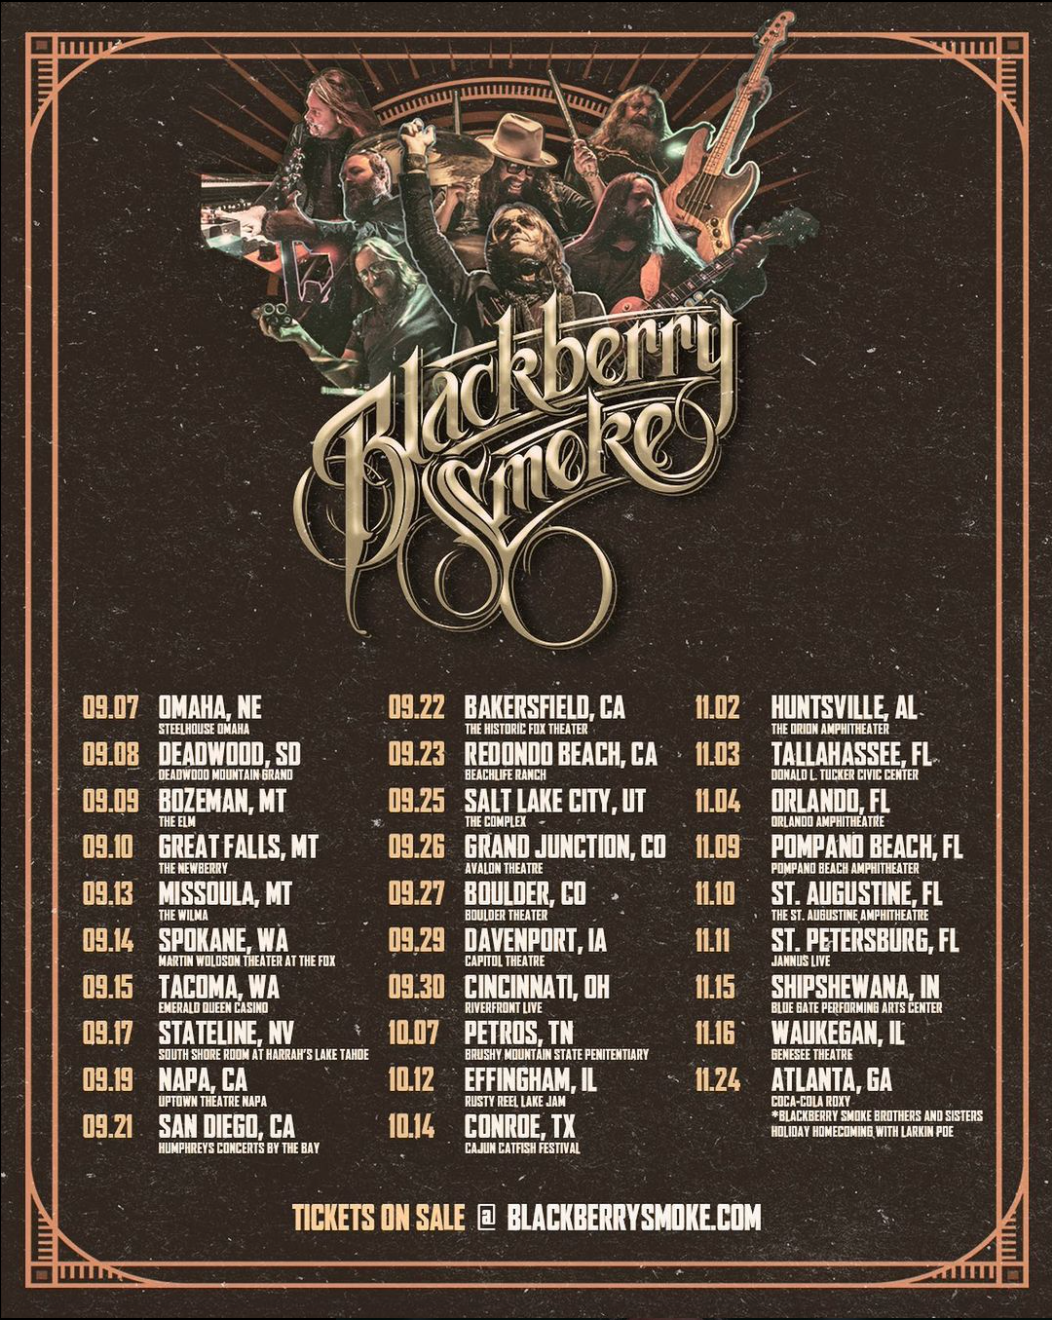 BBS Fall tour dates are ON SALE NOW, including newly added shows!